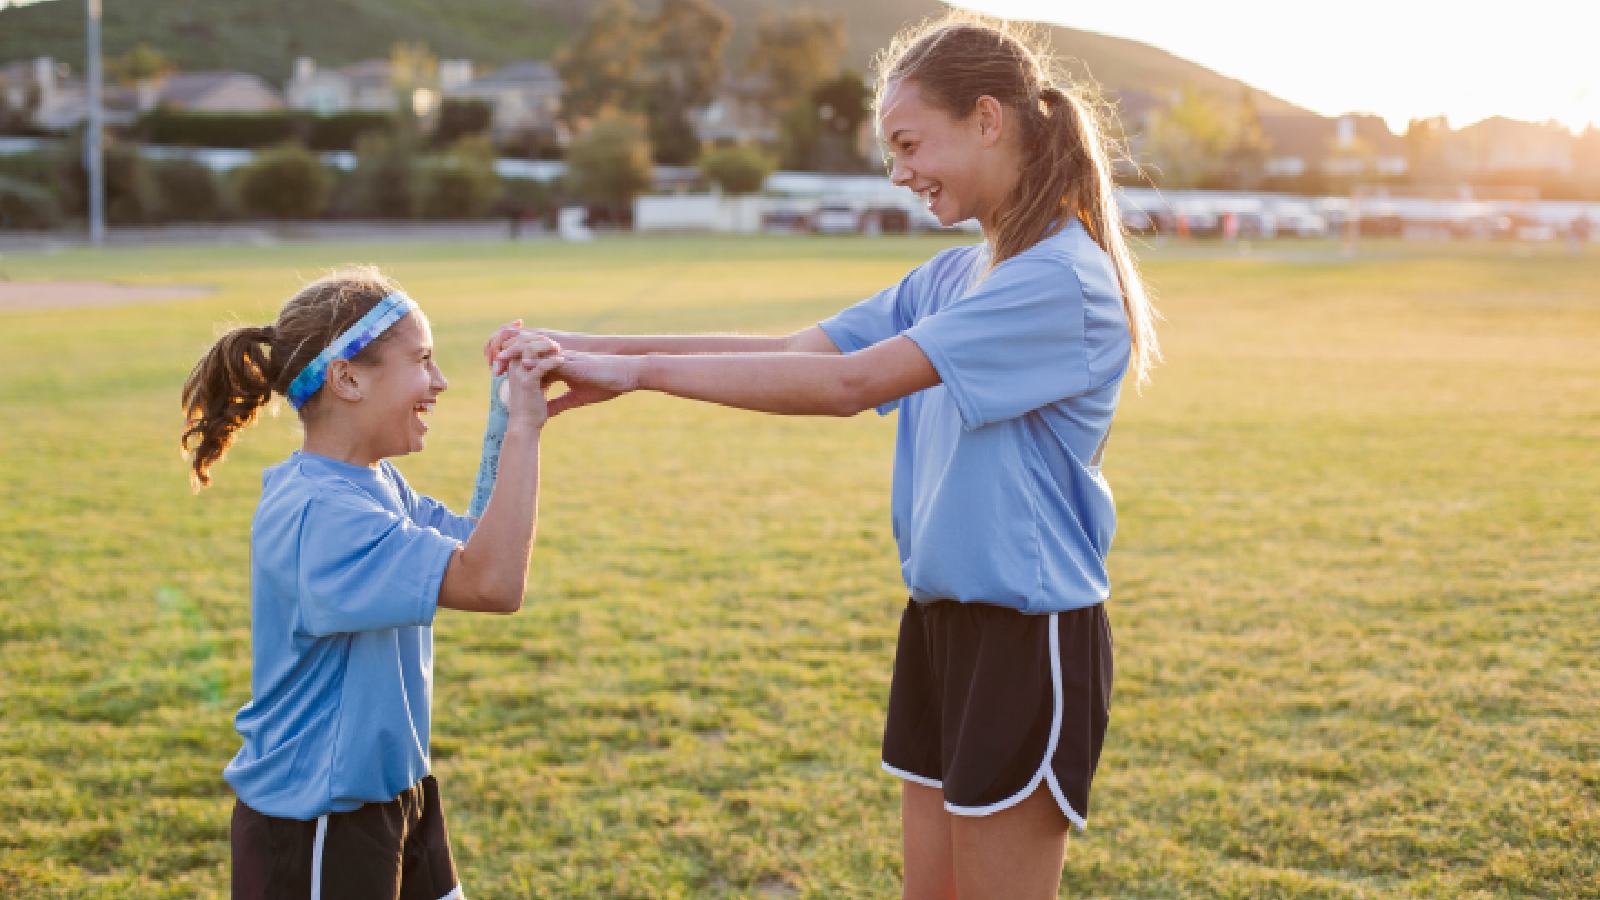 Sports anxiety in kids: Here’s how to manage it